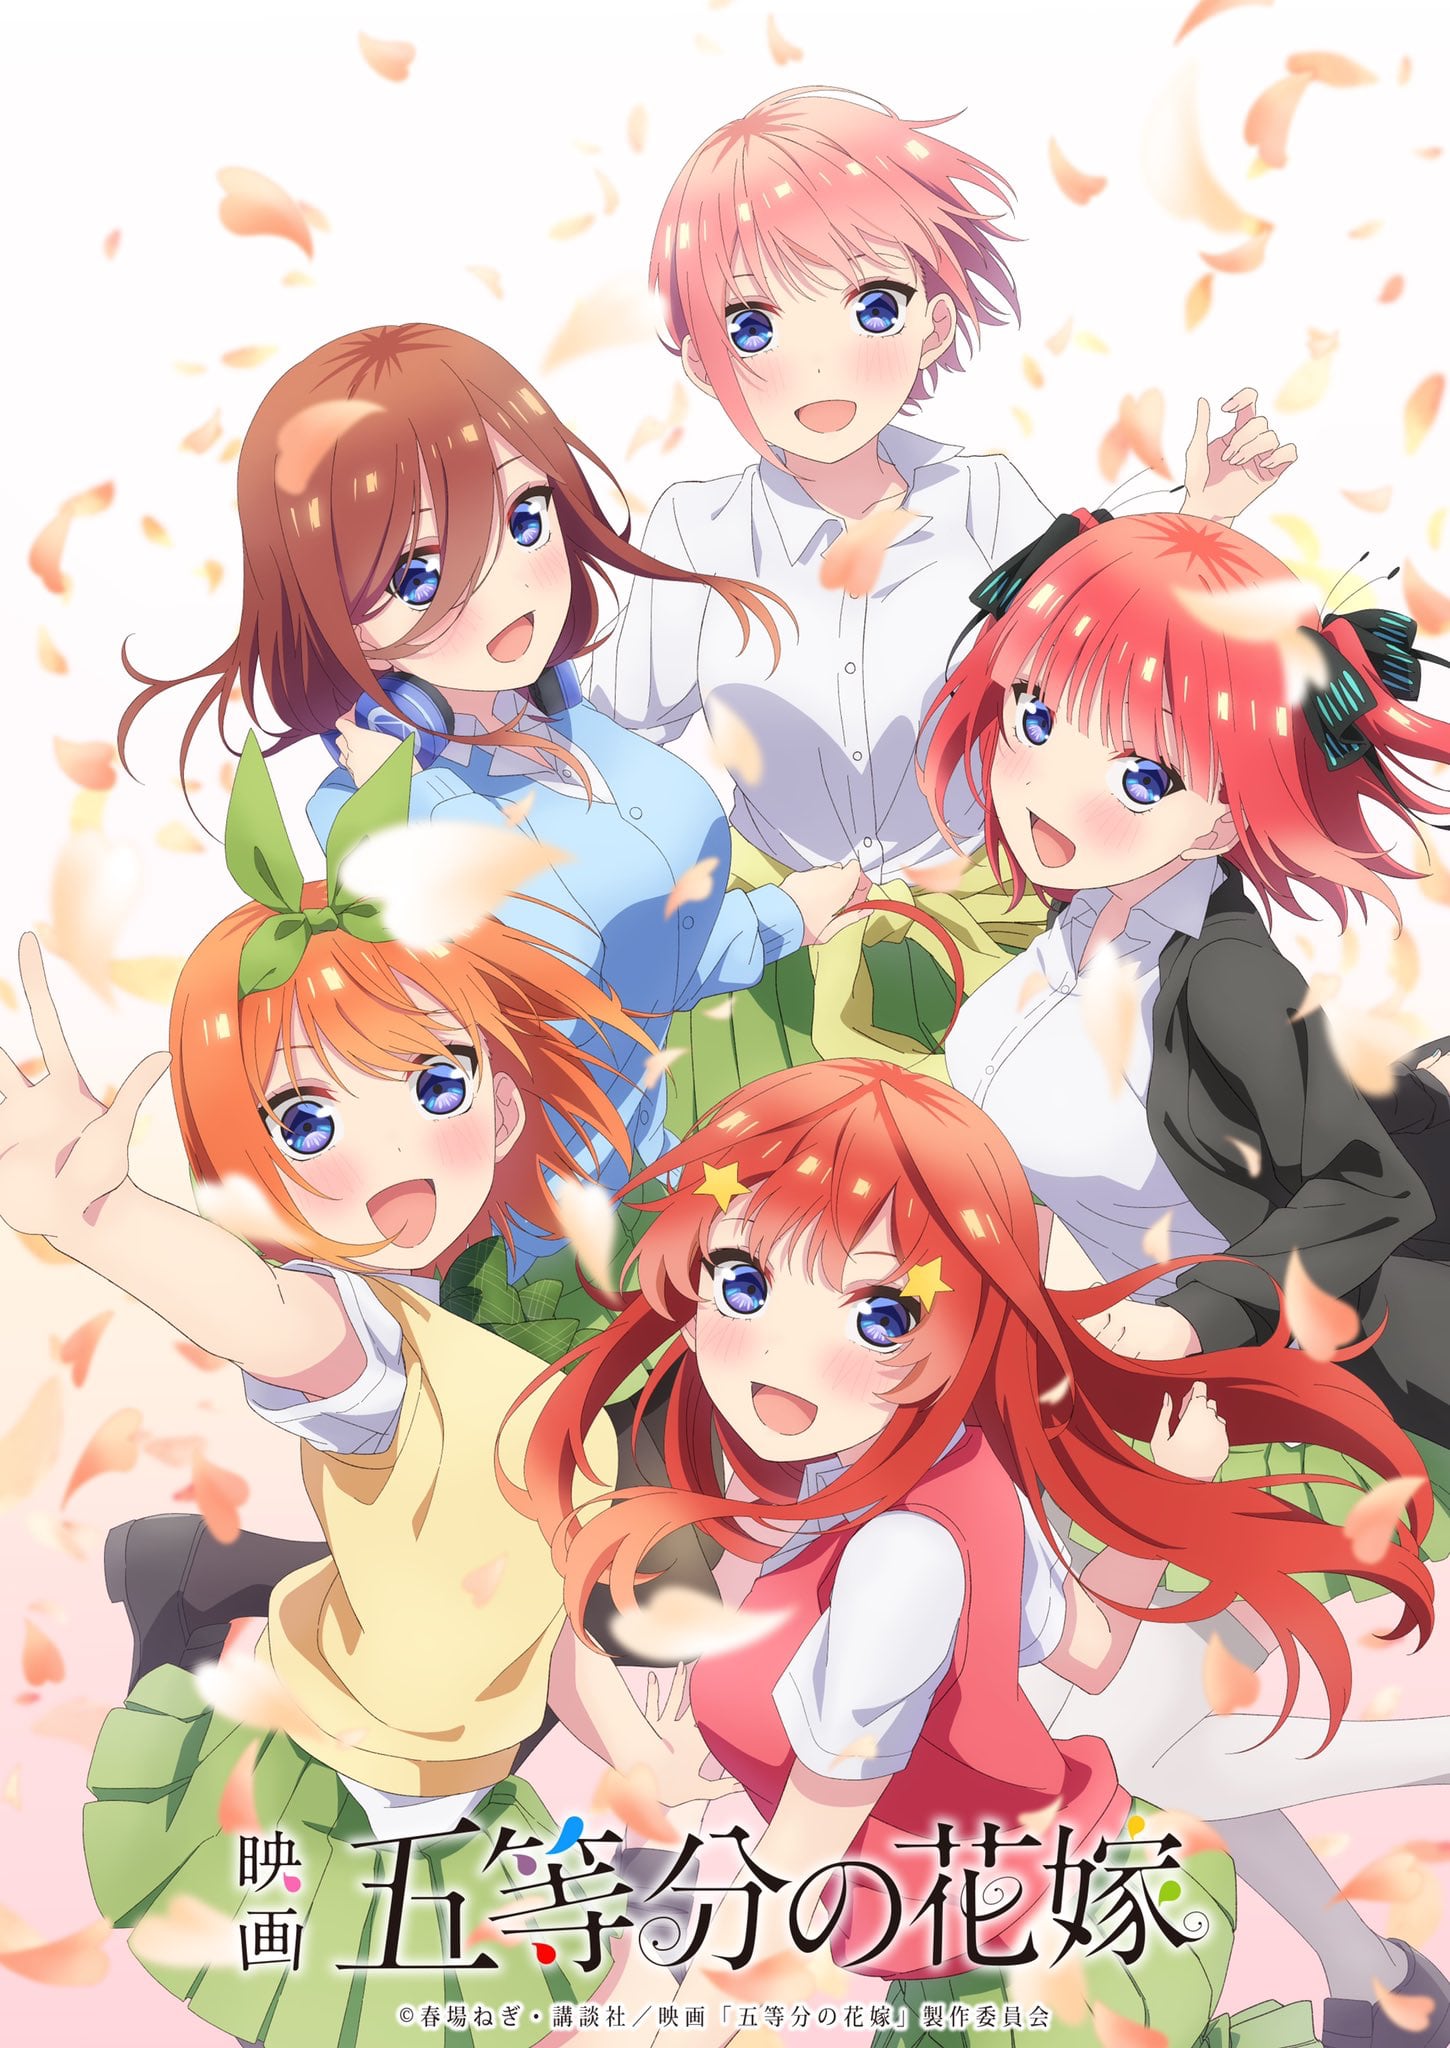 The Quintessential Quintuplets Side Story Anime Hyped in New Illustrations